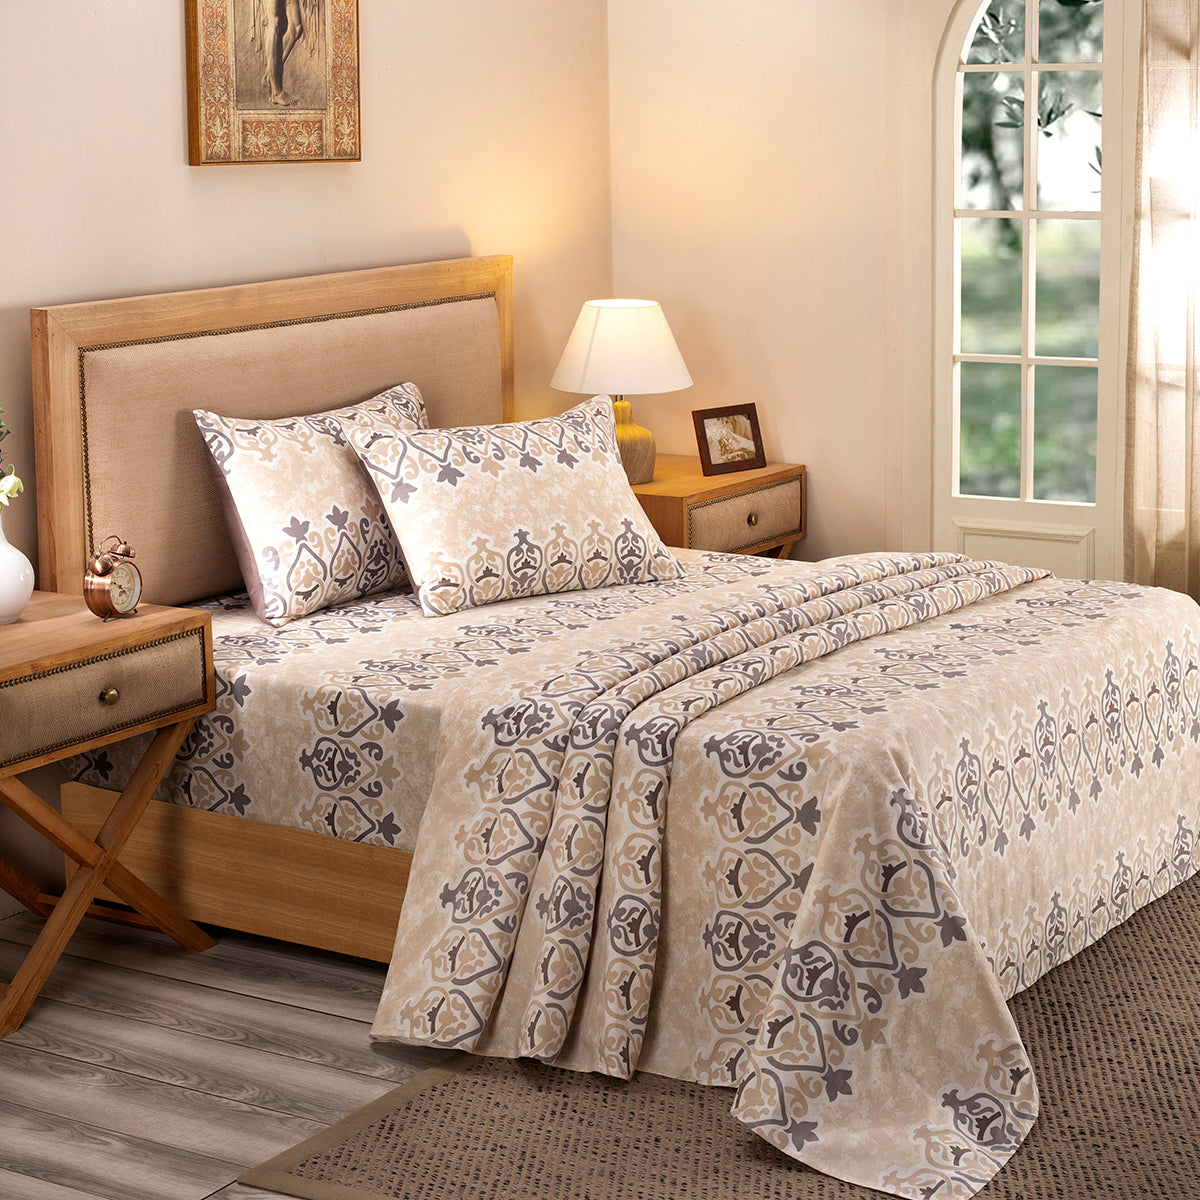 Nouveau Tradition Kaleen Global Neutral Bed Sheet